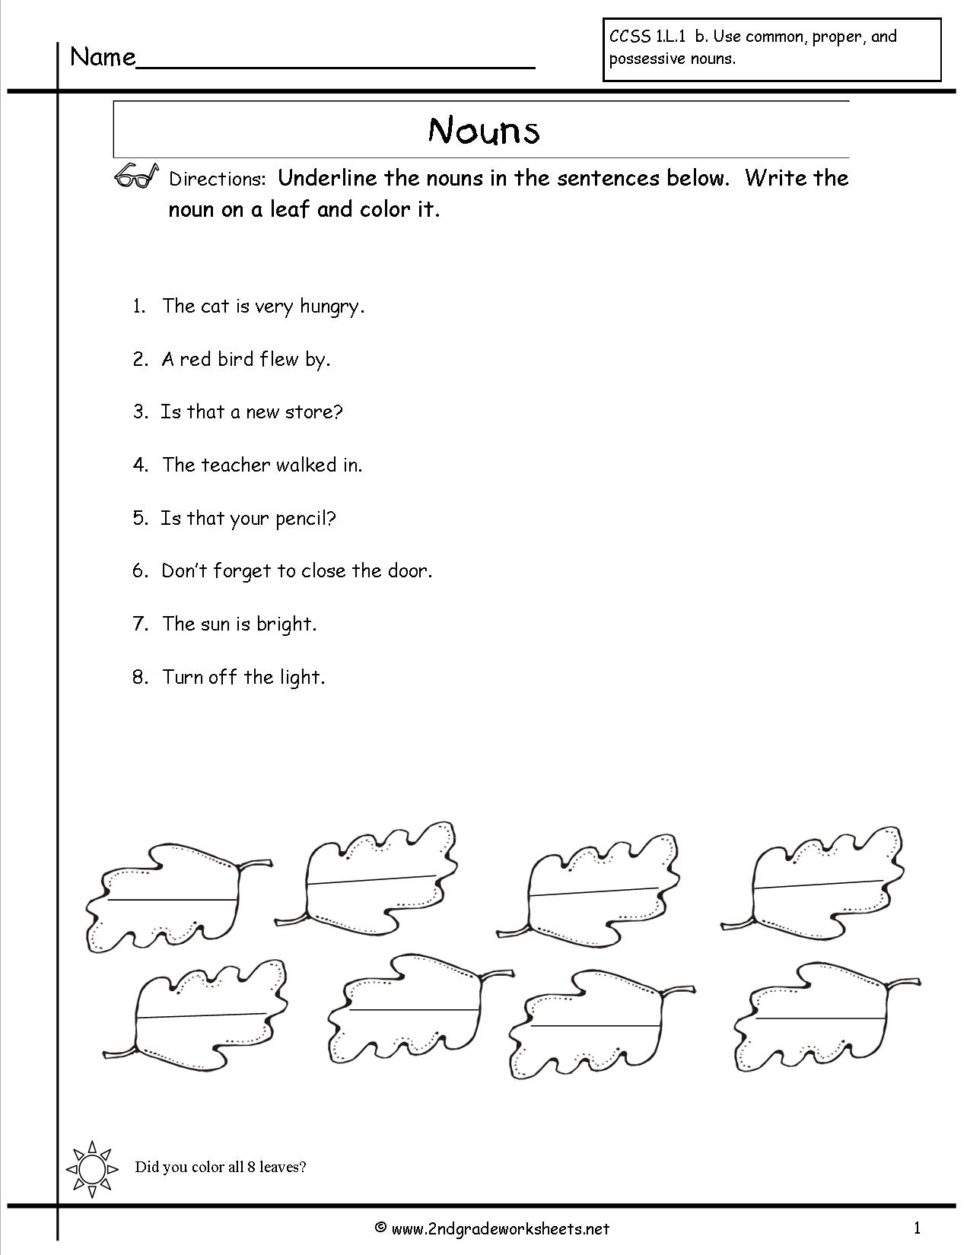 worksheet-stars-collective-noun-collective-nouns-and-verb-worksheets-samples